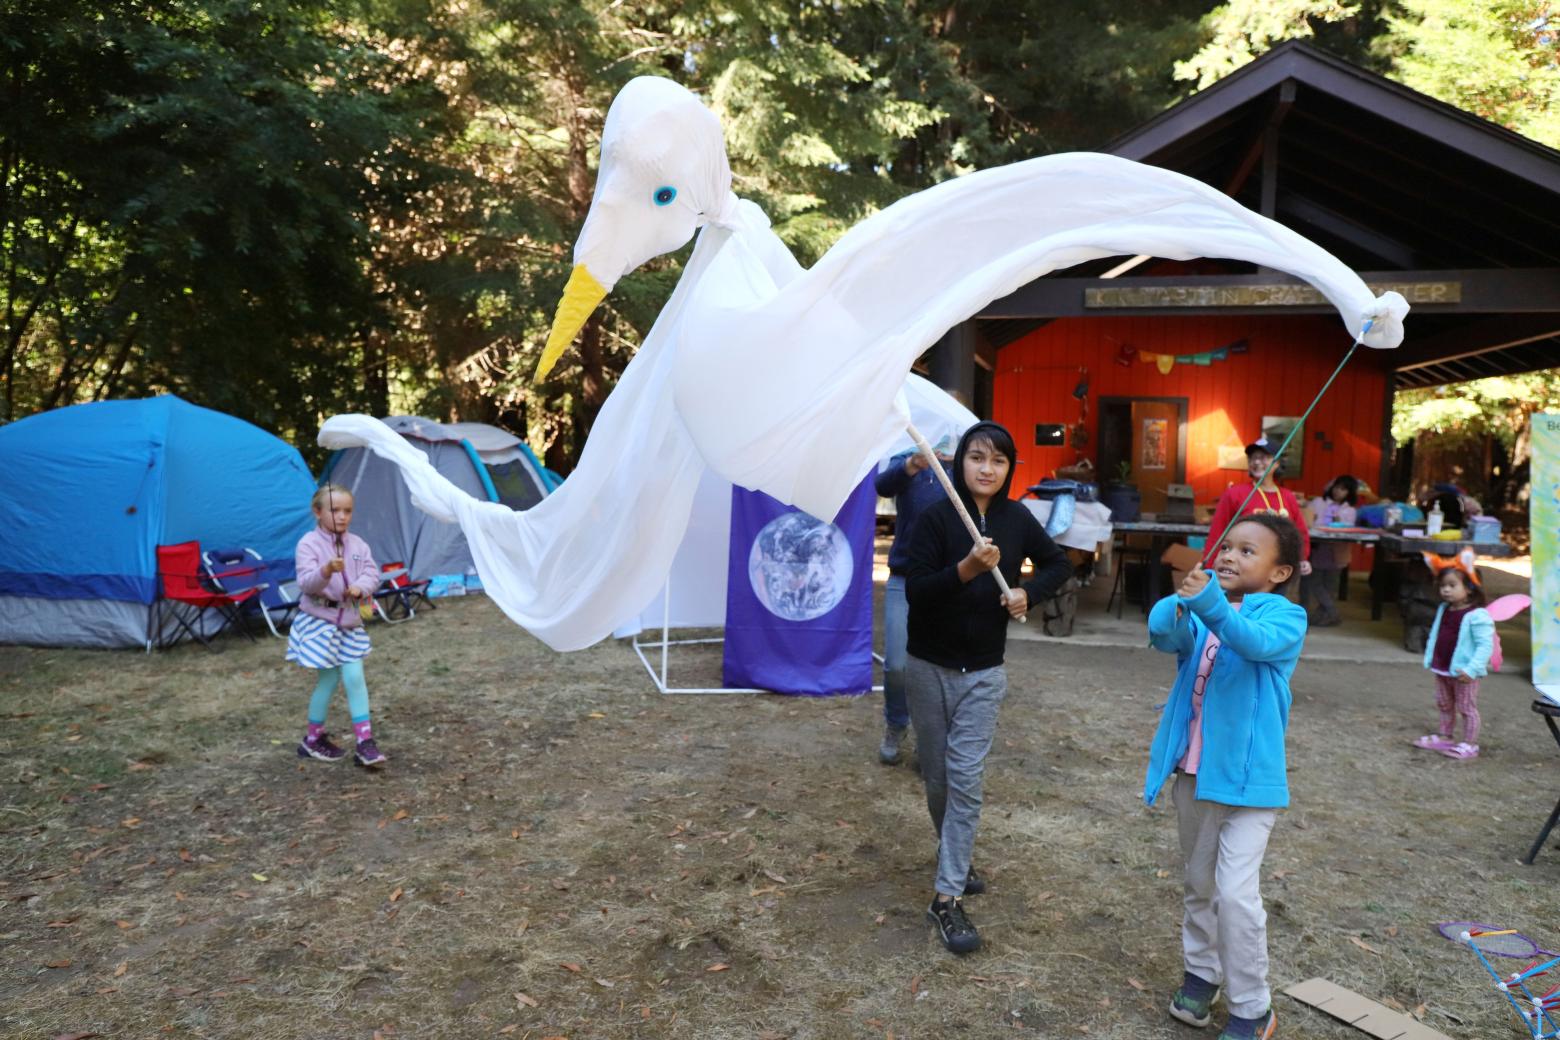 Children holding sticks hold up large bird puppet as they parade through camp grounds.